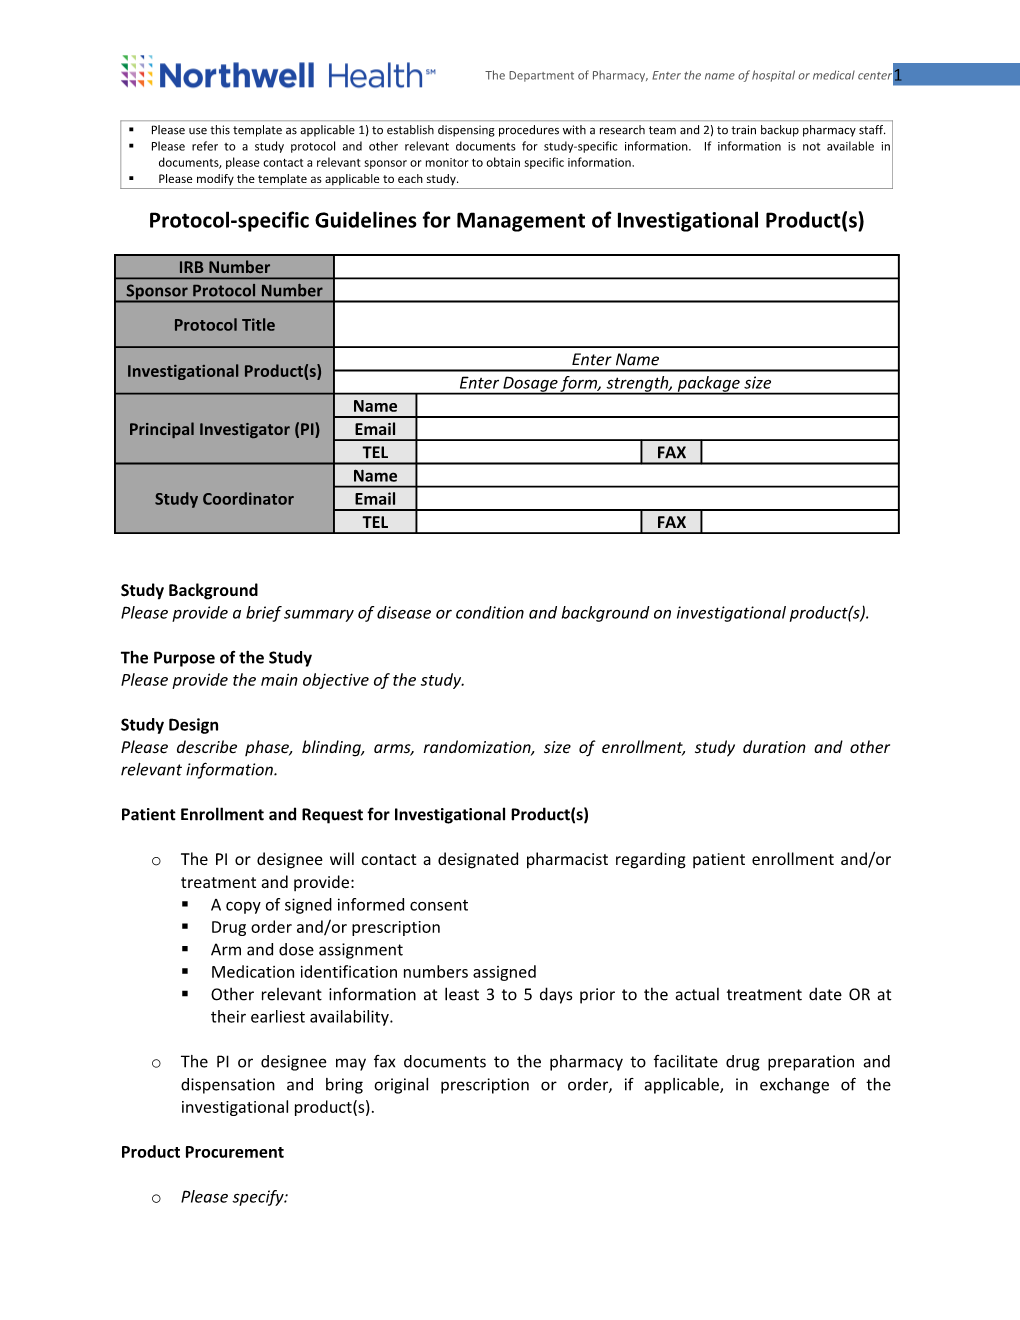 Protocol-Specific Guidelines Formanagement of Investigational Product(S)